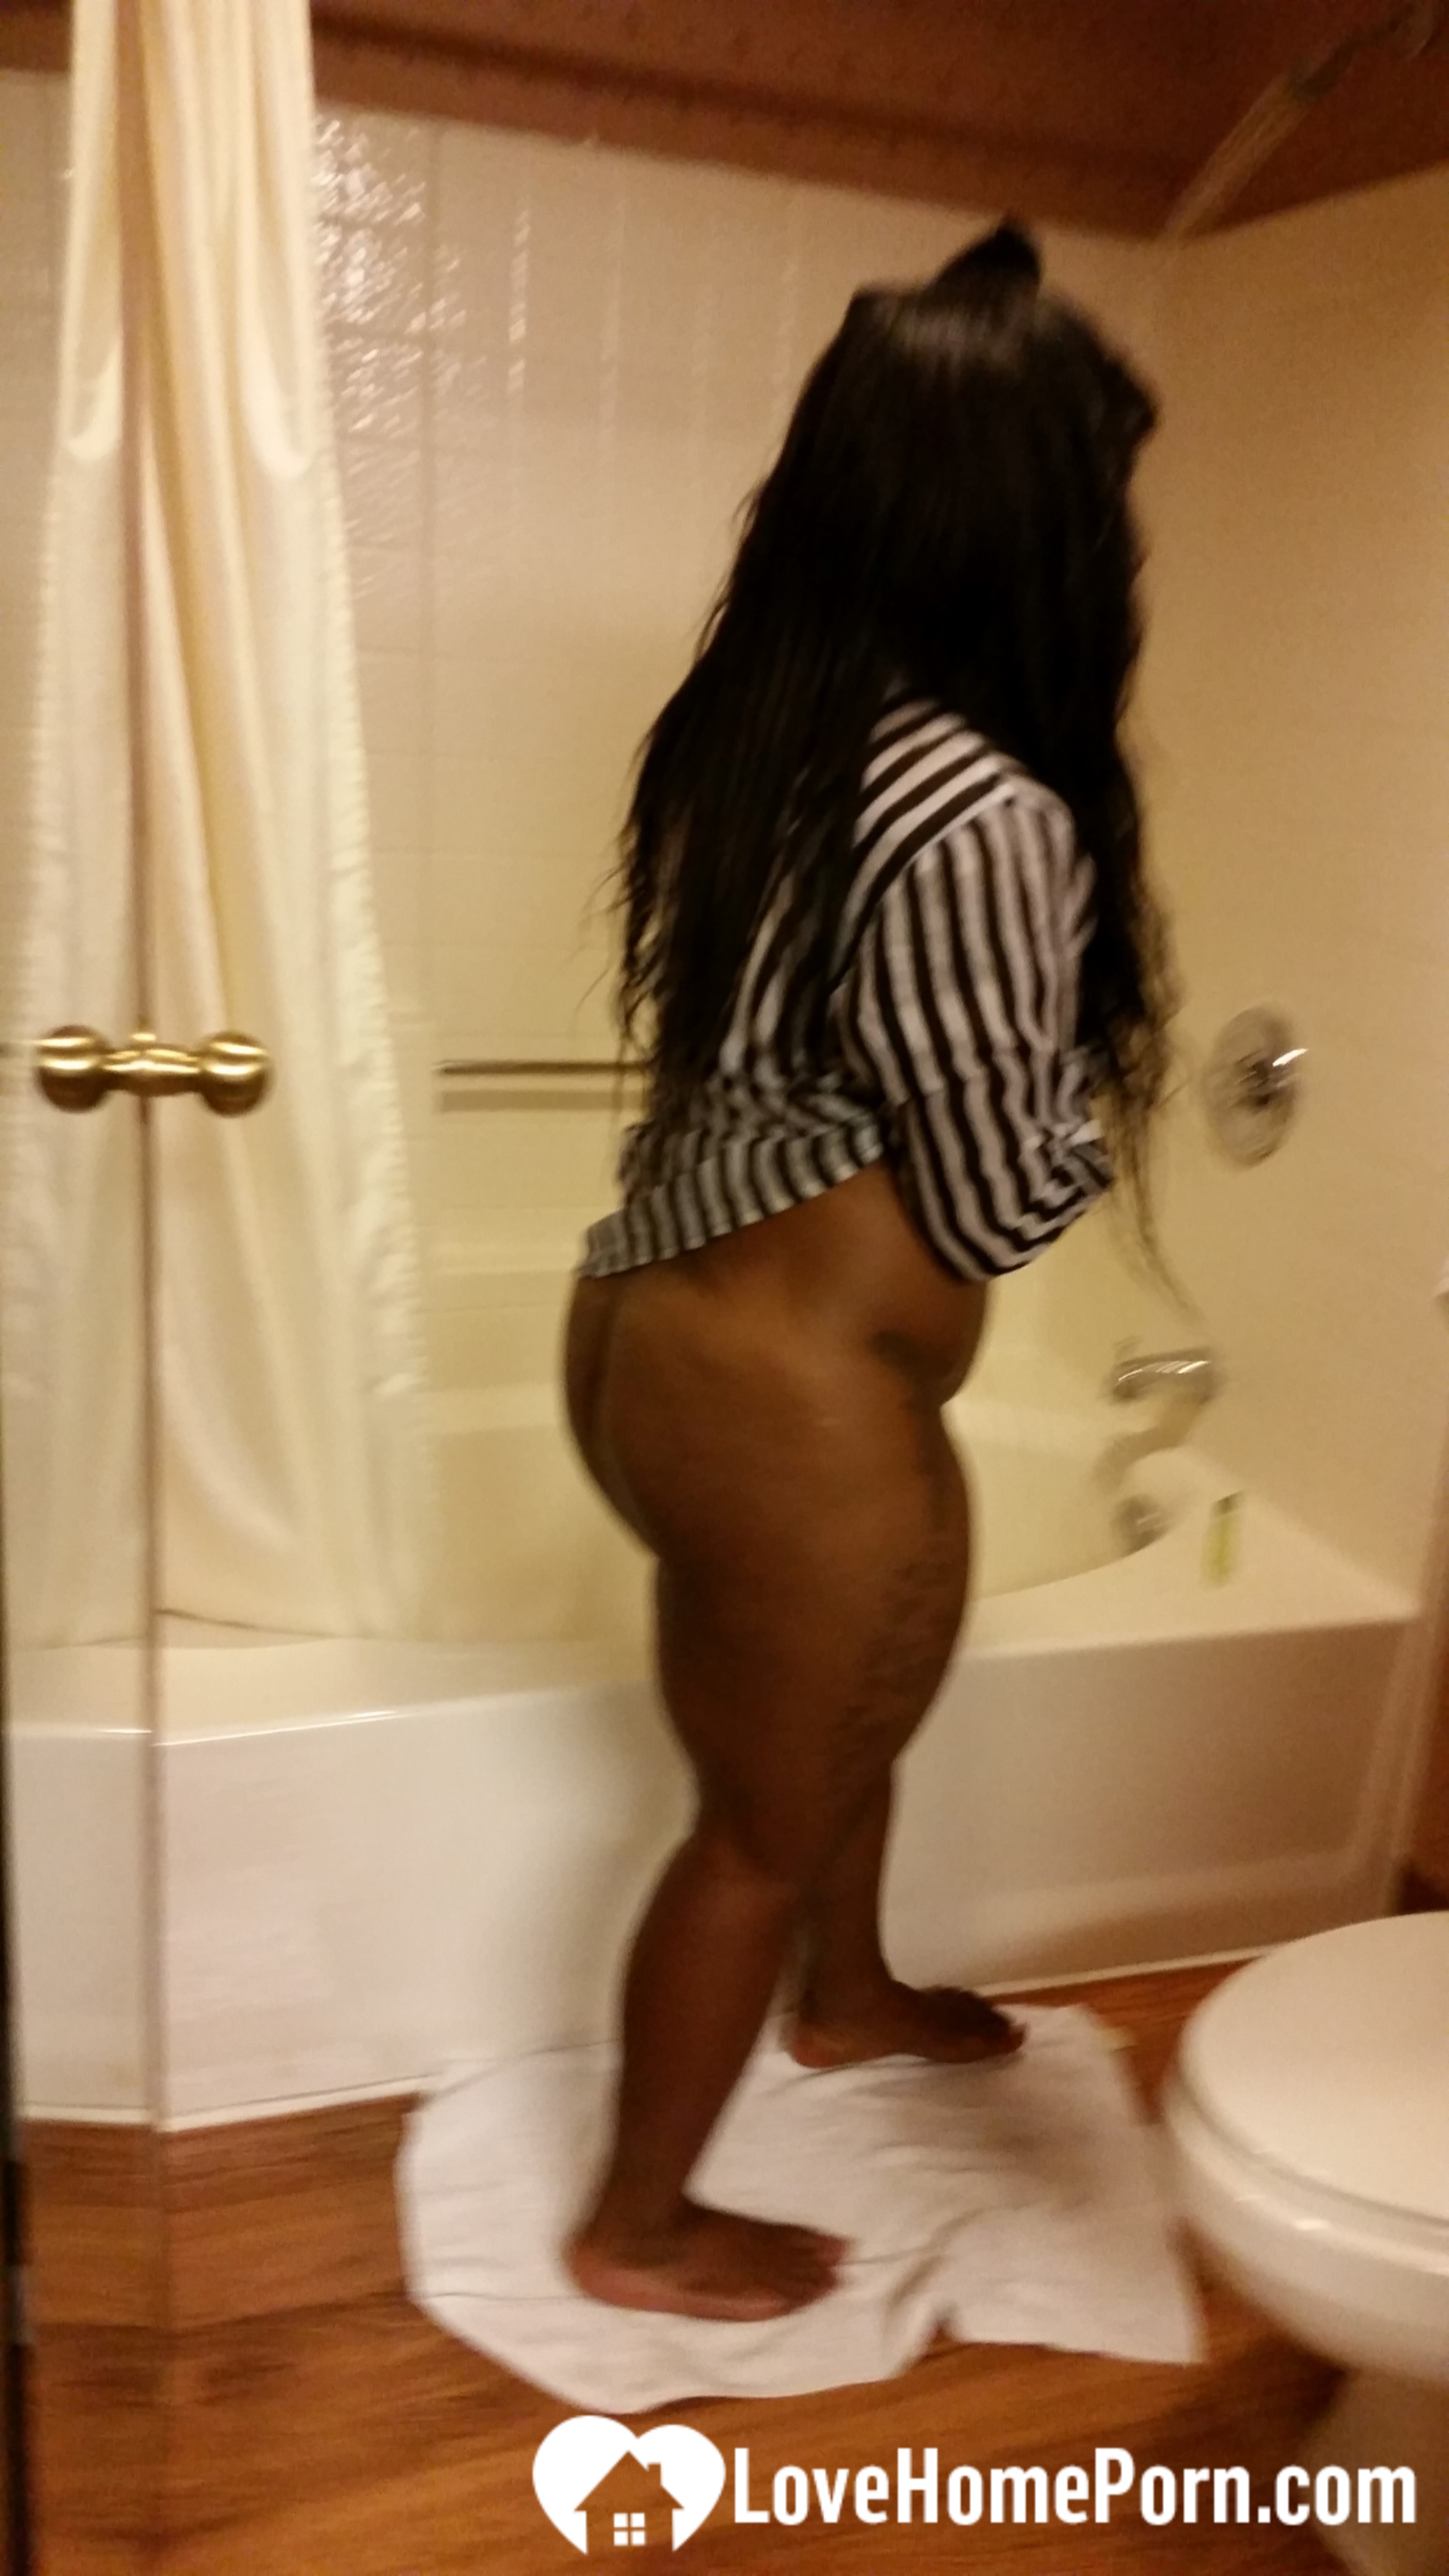 Black honey gets recorded as she showers